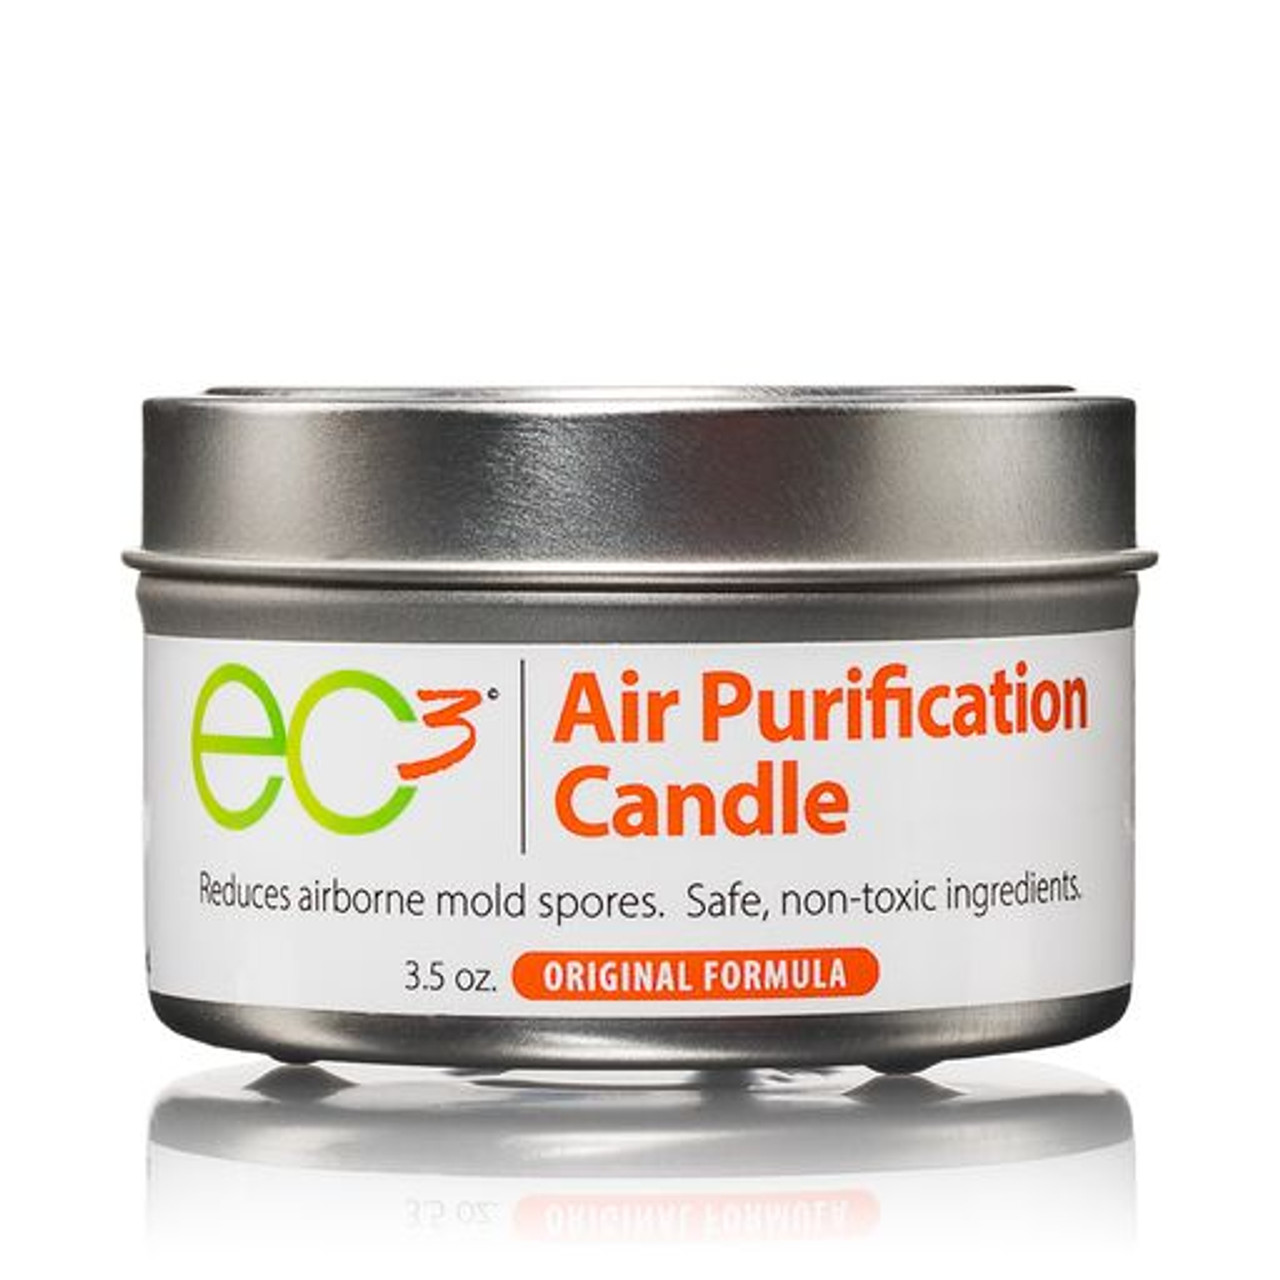 Question] EC3 Air Purification candles are a scam? I would like to purchase  them but there is a feeling that these are just regular scented candles  that cost a fortune. Did anybody